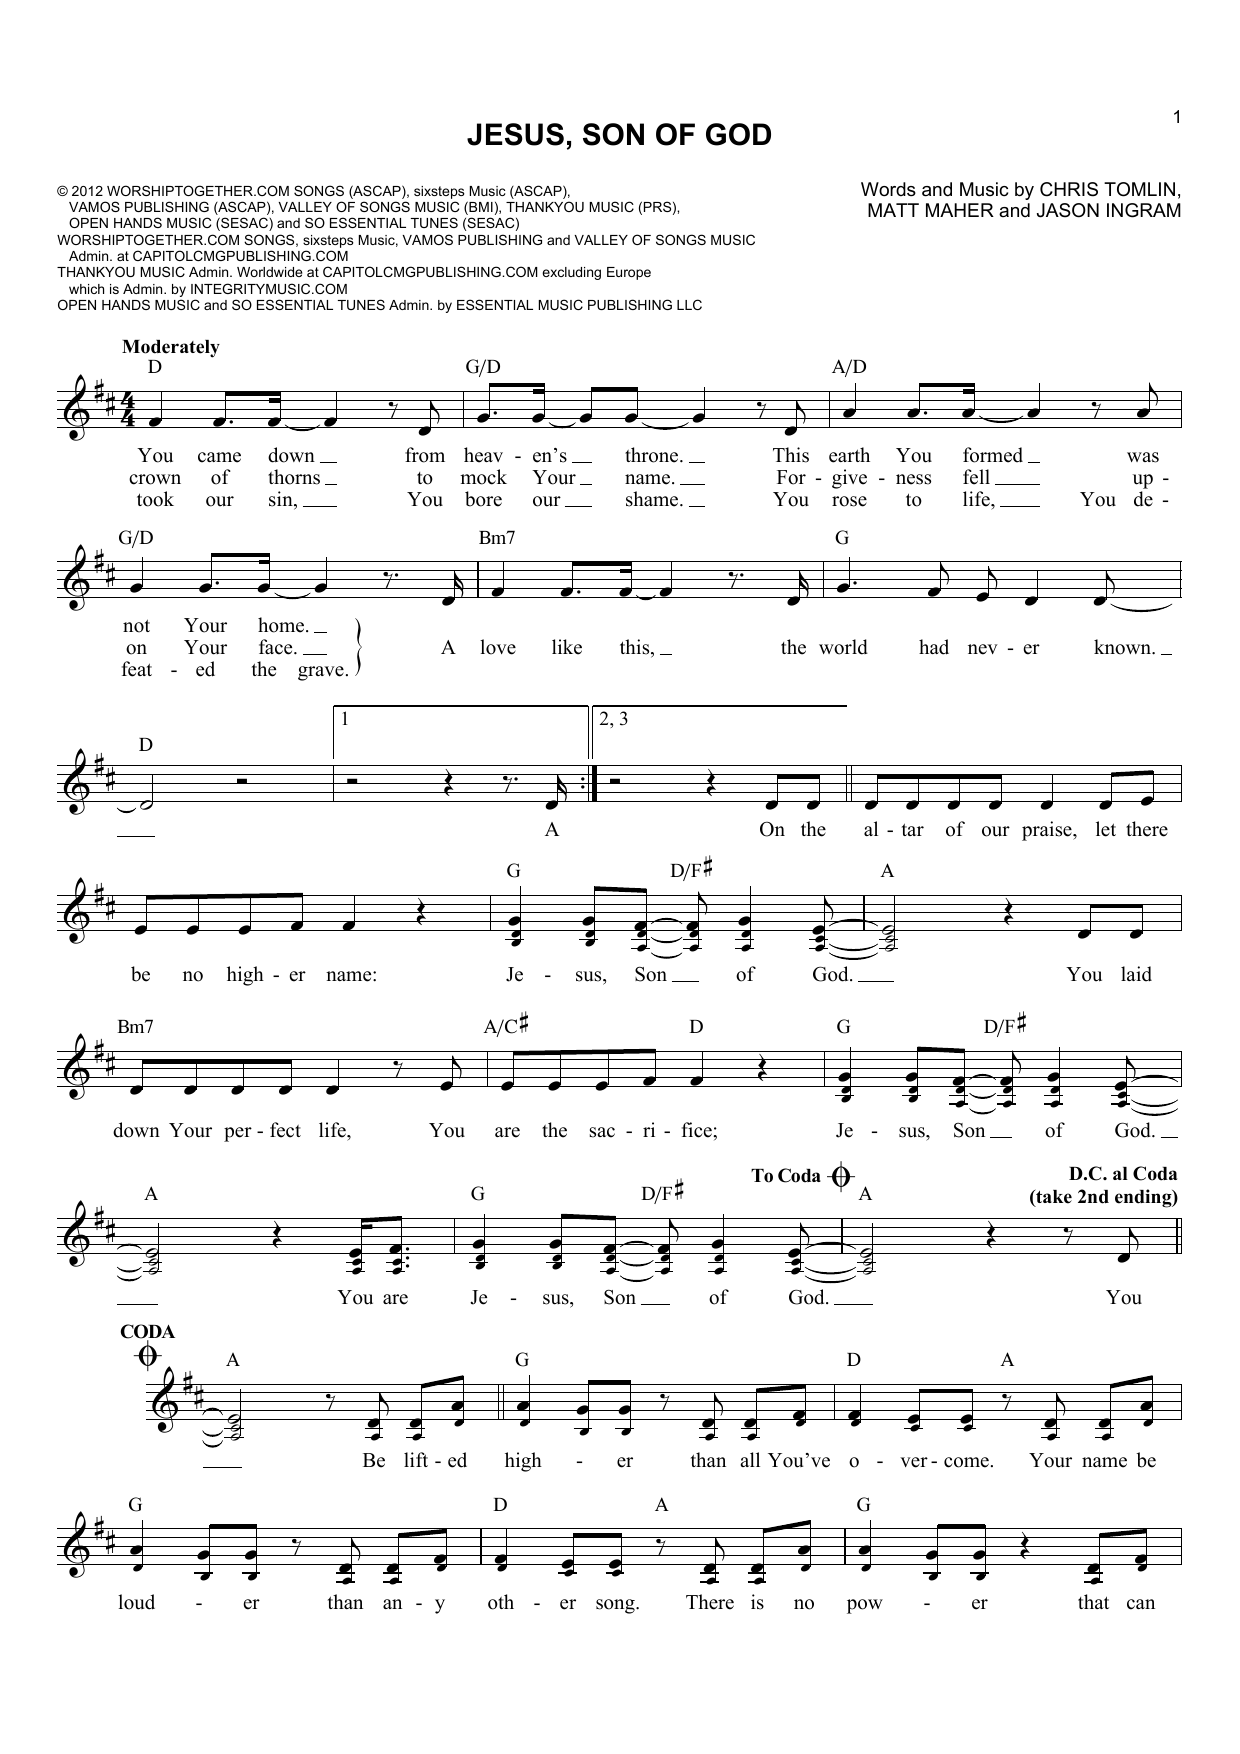 Download Passion Jesus, Son Of God Sheet Music